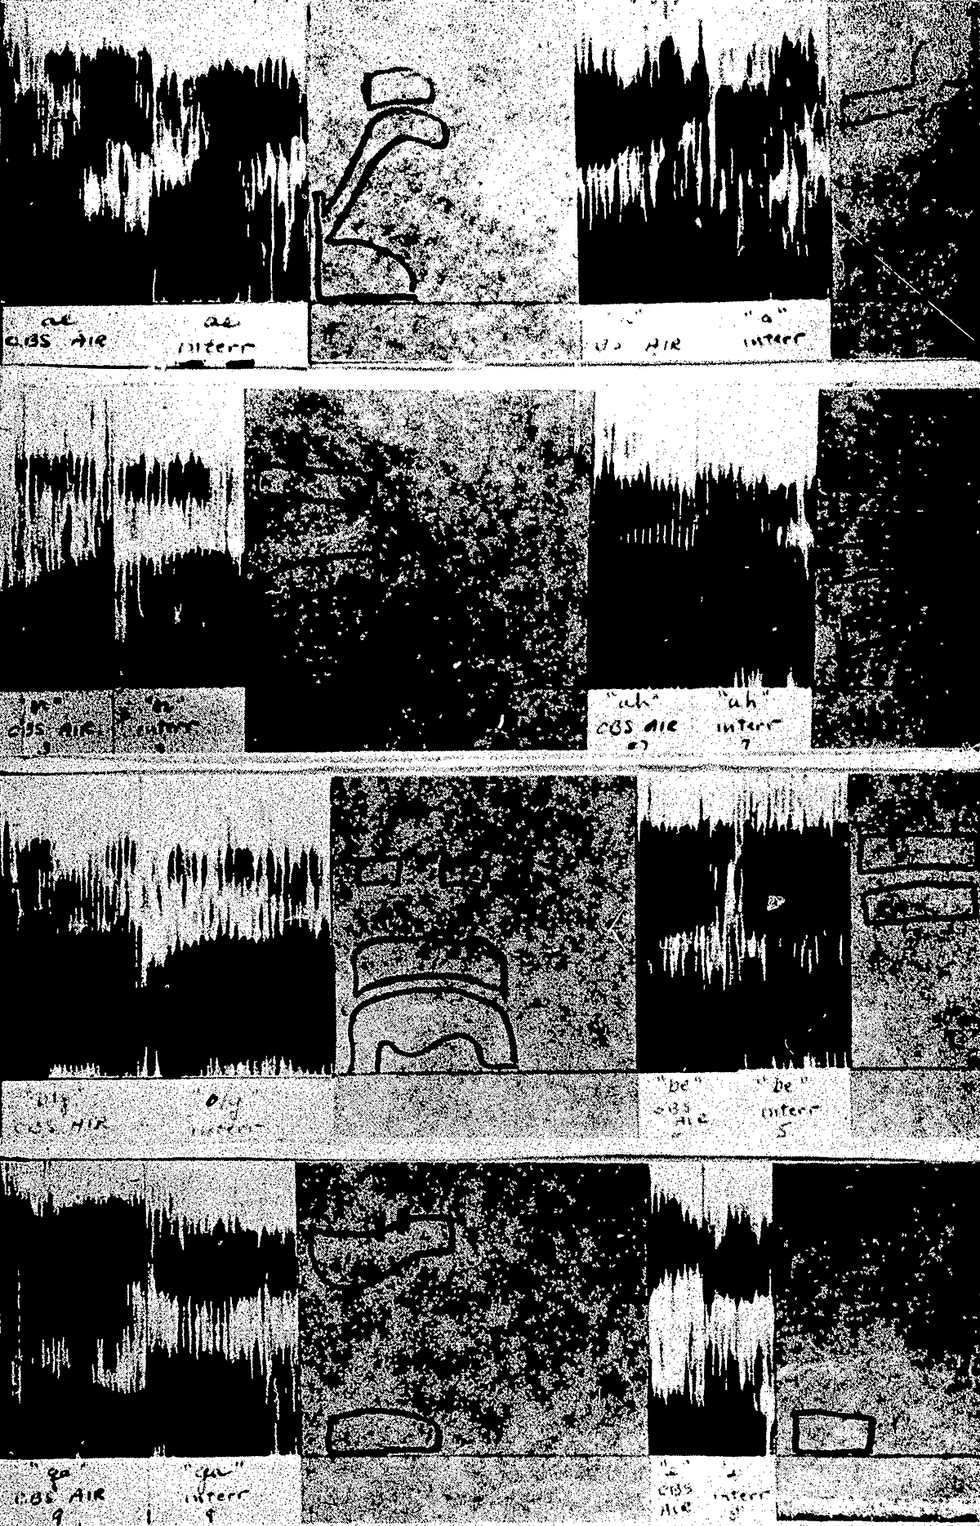 A variety of graphs depict spectrograms of audio samples of speech.Info